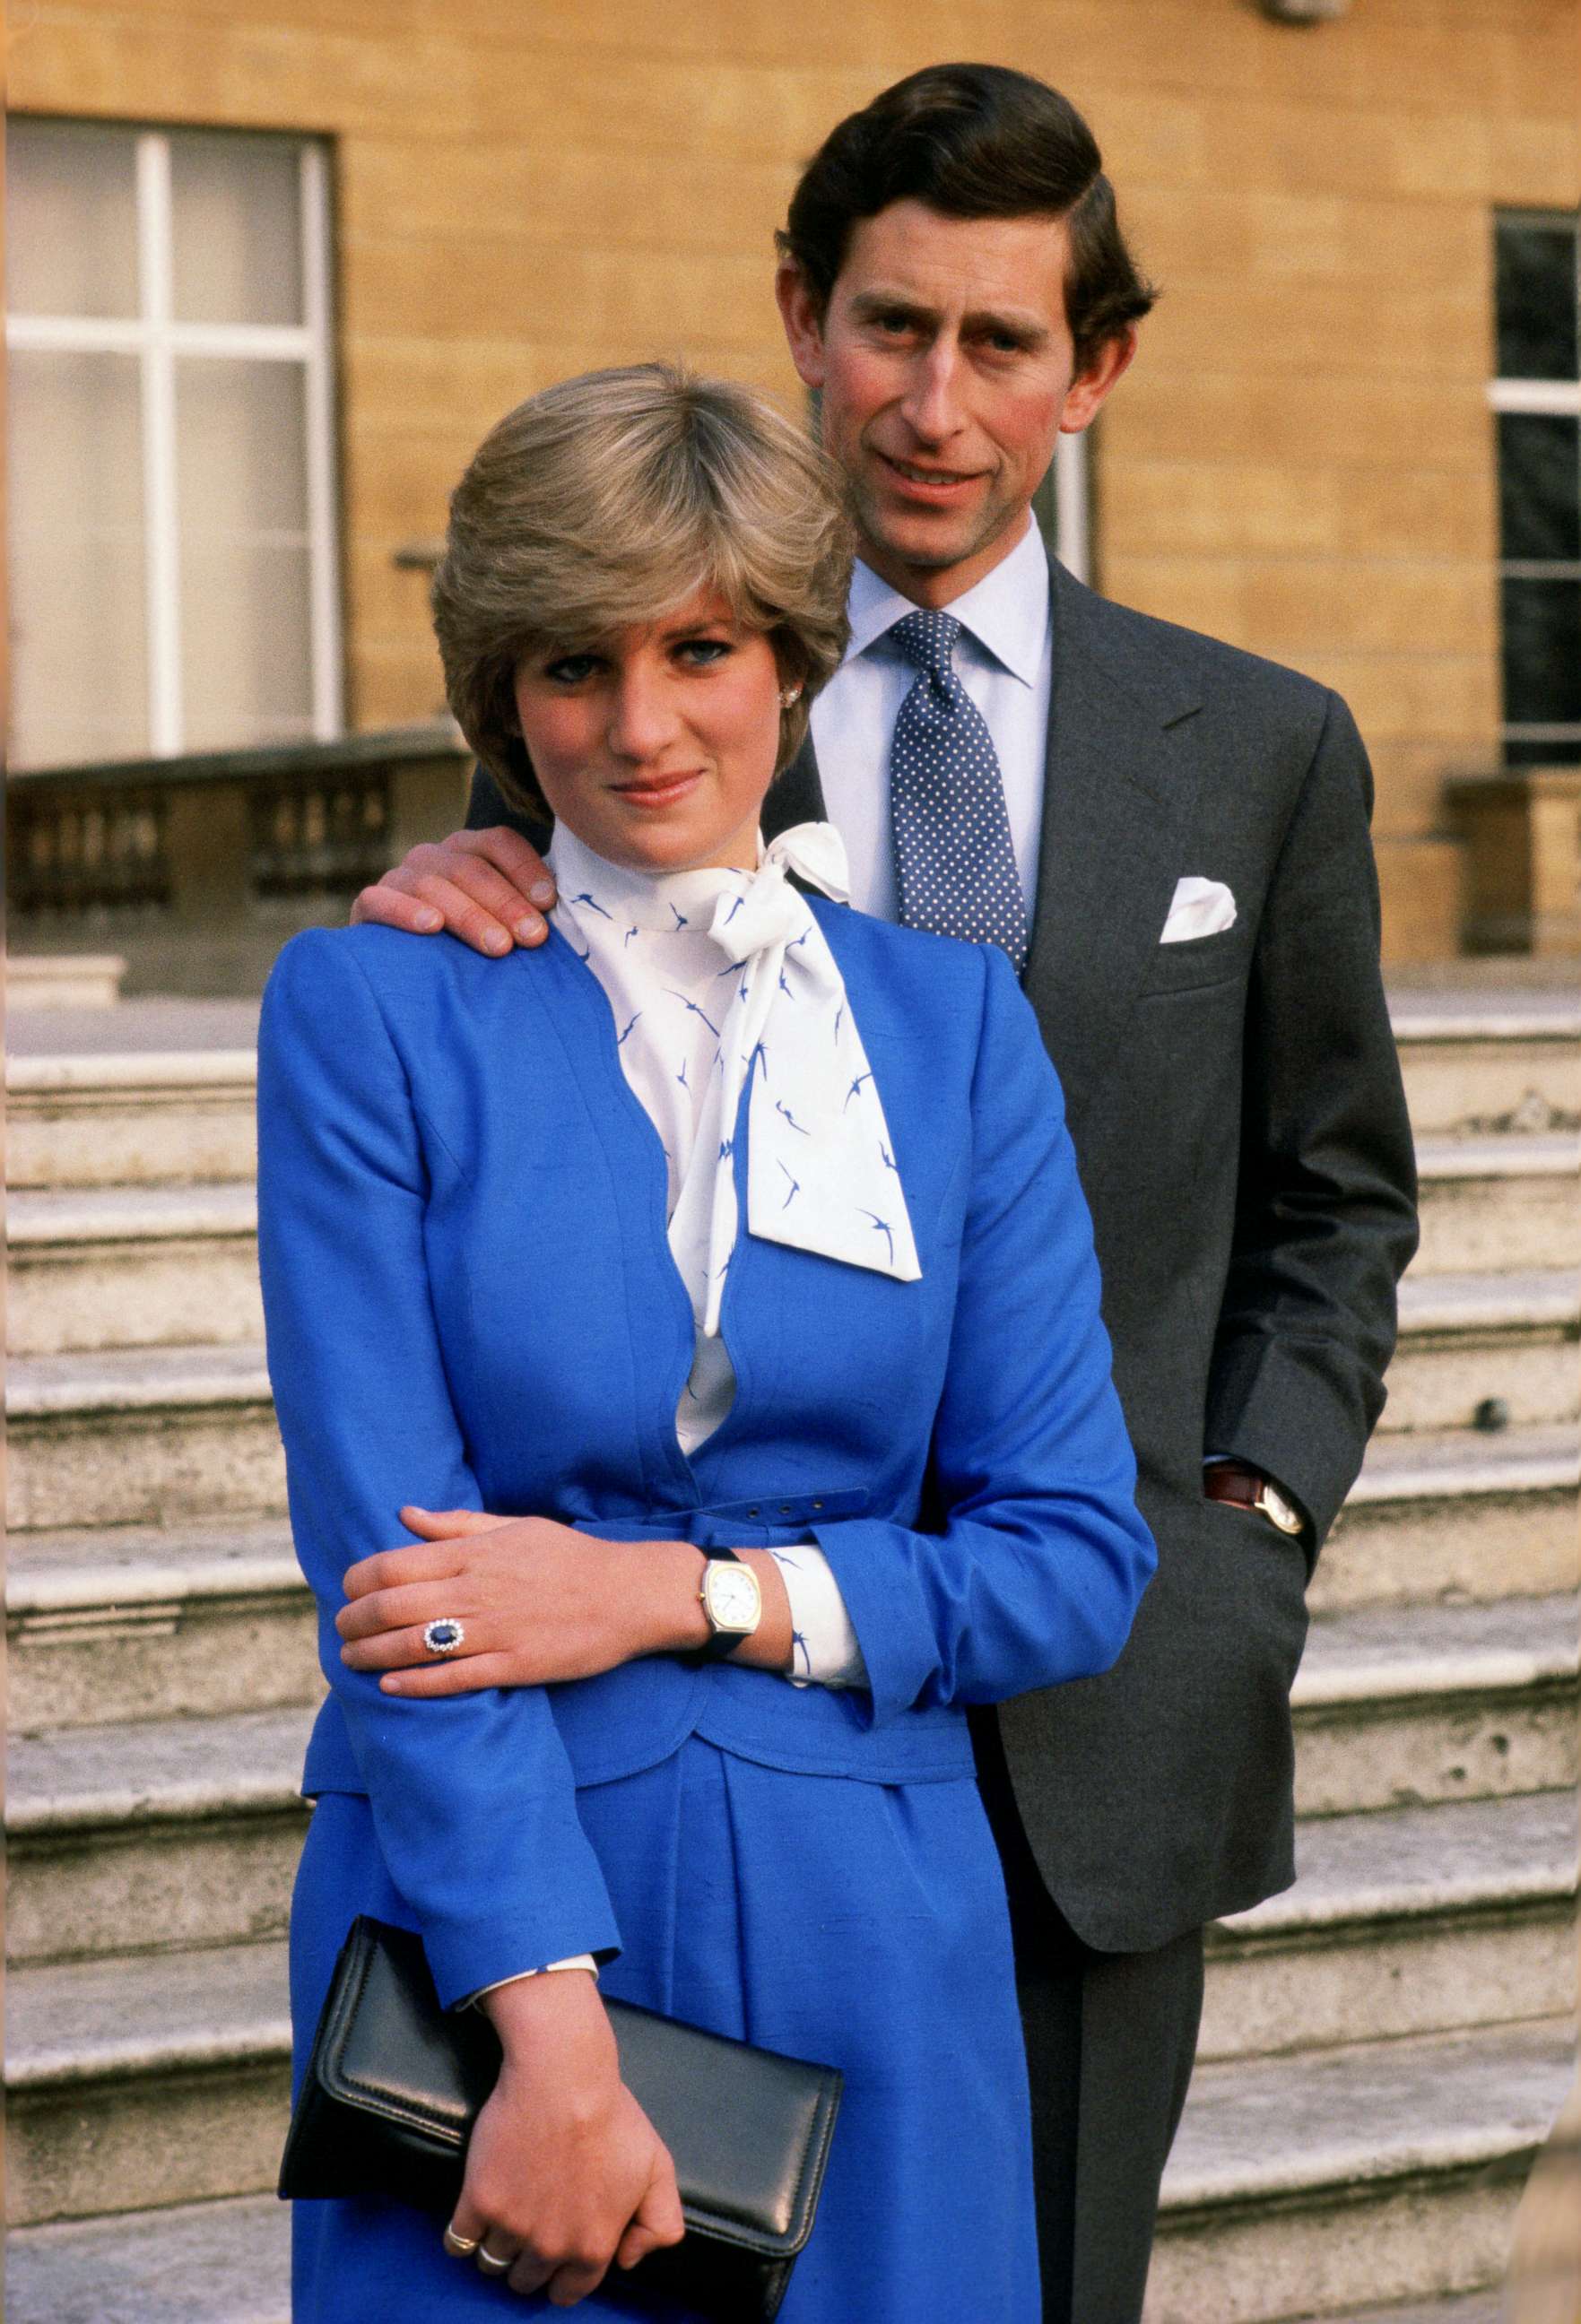 PHOTO: Lady Diana Spencer (later to become Princess of Wales) reveals her sapphire and diamond engagement ring alongside Prince Charles, Prince of Wales at Buckingham Palace following the announcement of their engagement.